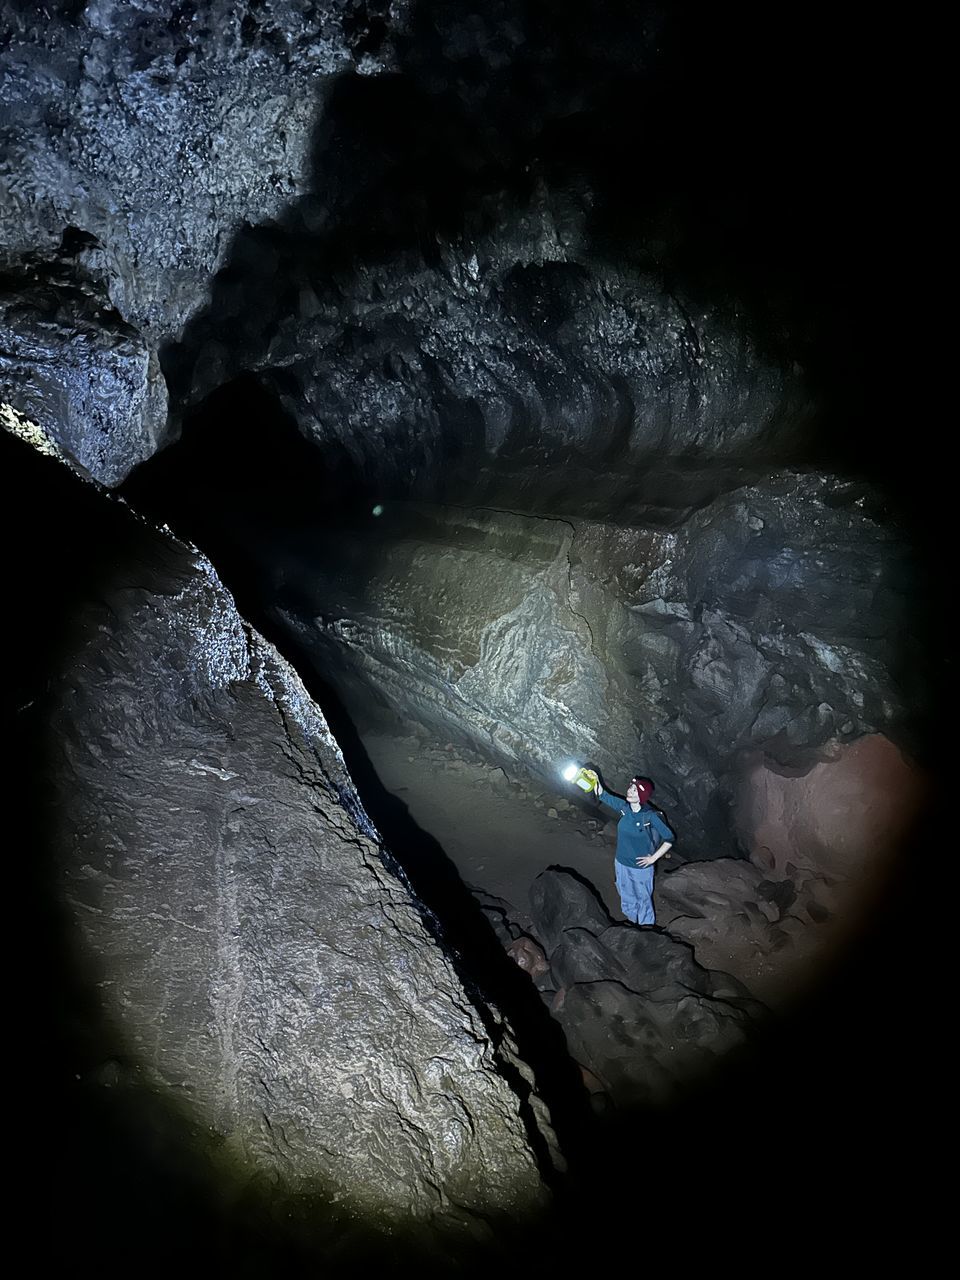 cave, darkness, adventure, one person, rock, nature, caving, screenshot, water, sports, beauty in nature, ice cave, outdoors, extreme sports, leisure activity, exploration, rock formation, adult, men